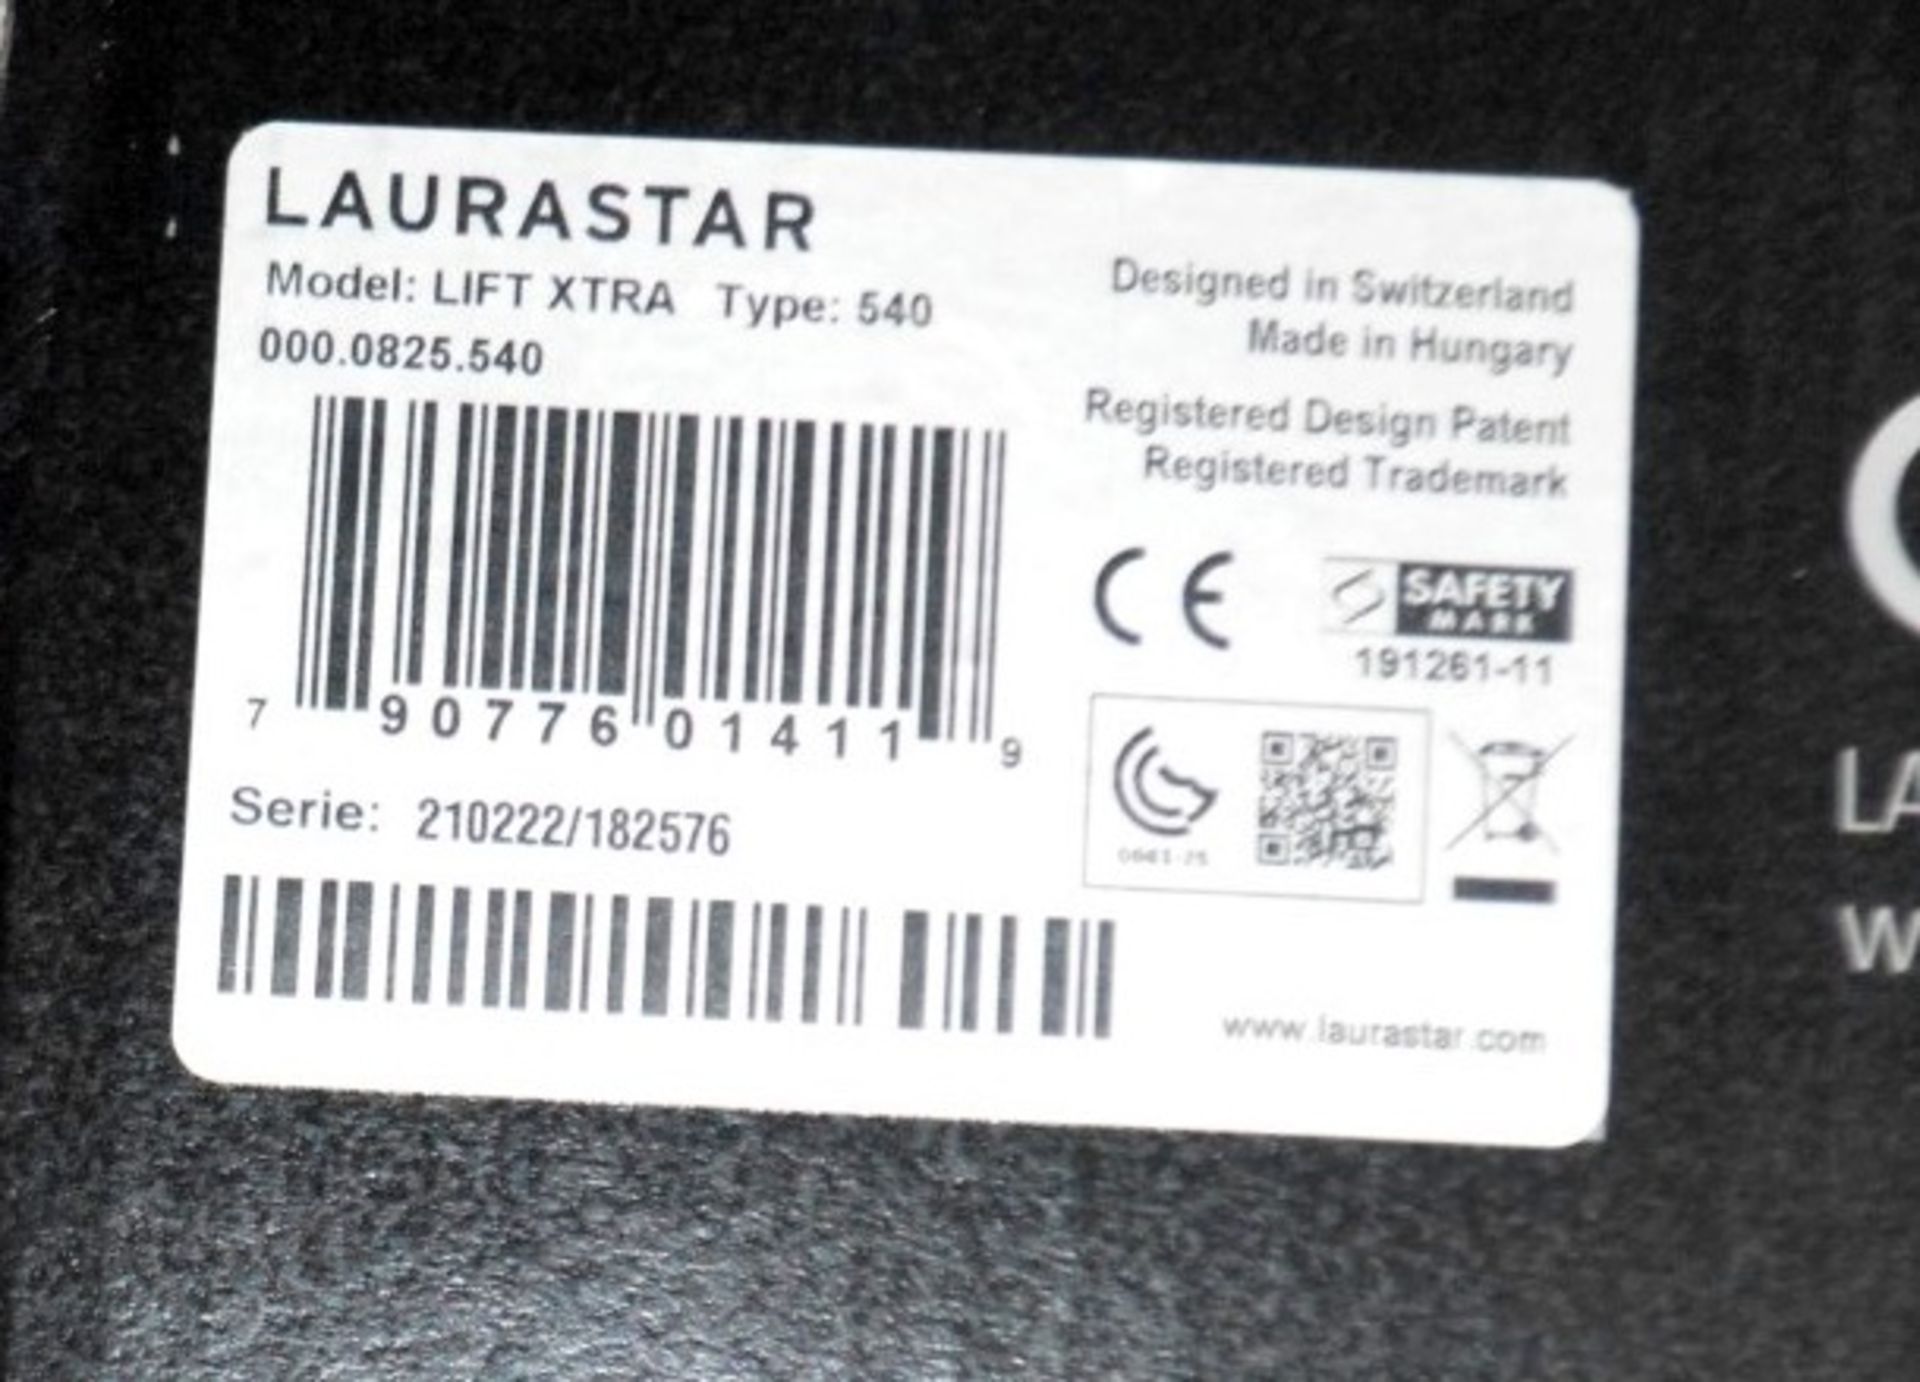 1 x Laurastar Lift Xtra 3-in-1 Steam Generator Irons, Steams and Purifies Clothing - RRP £499.00 - Image 5 of 14